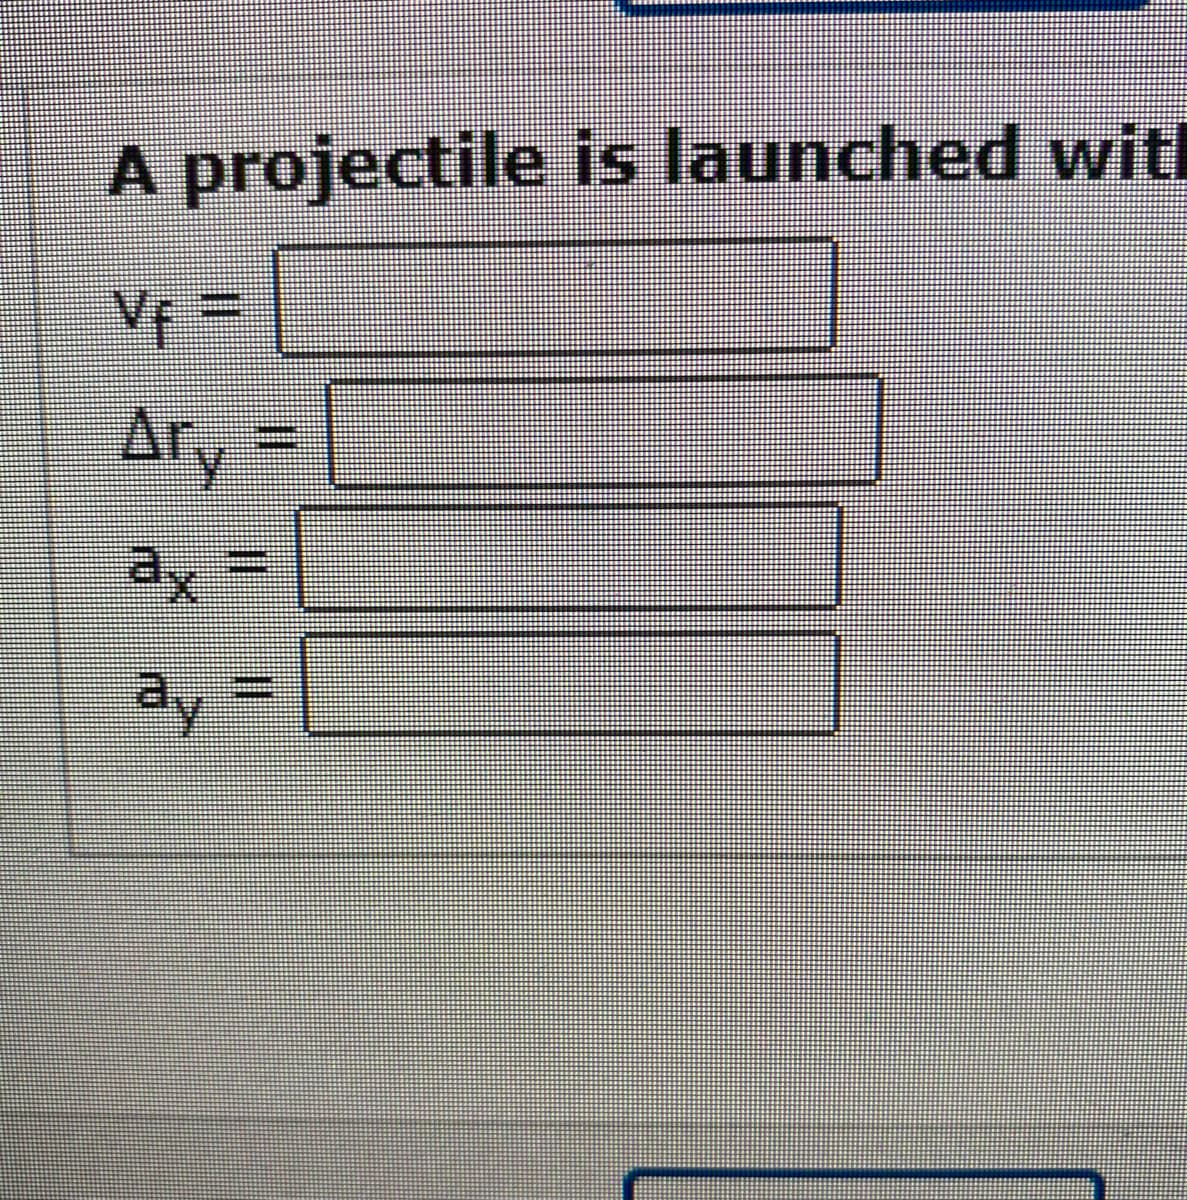 A projectile is launched witl
Vf=
Ary
ax =
ay
C